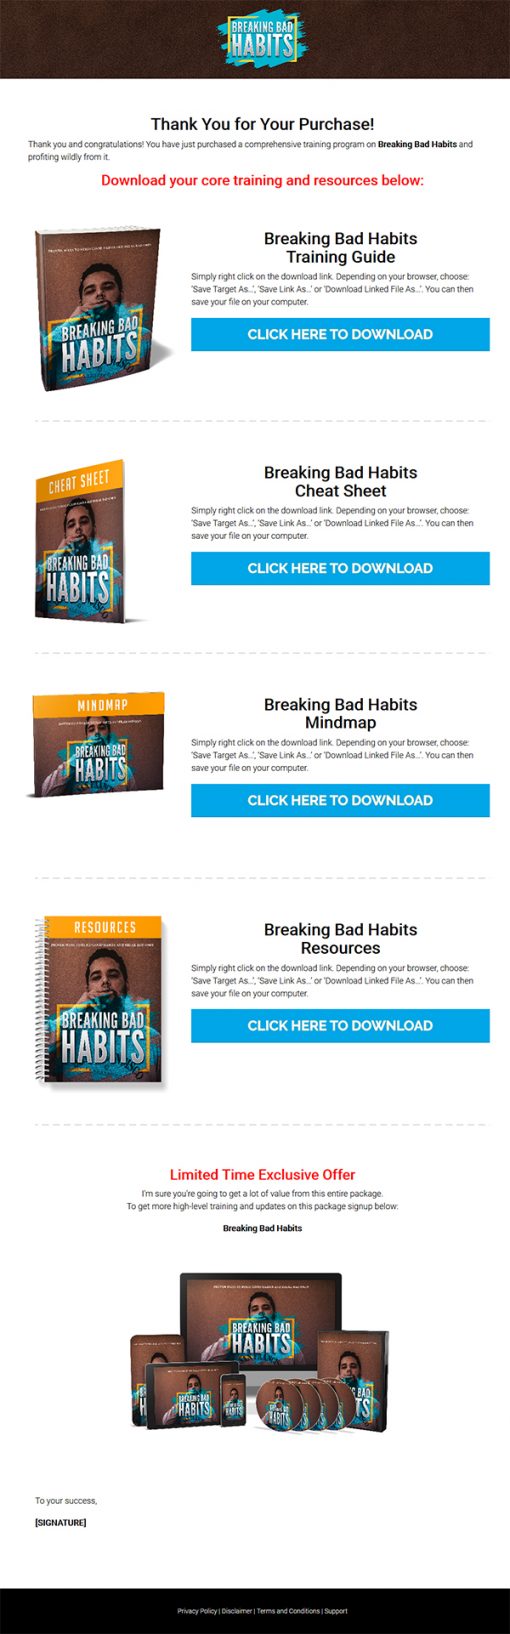 Breaking Bad Habits Ebook and Videos MRR